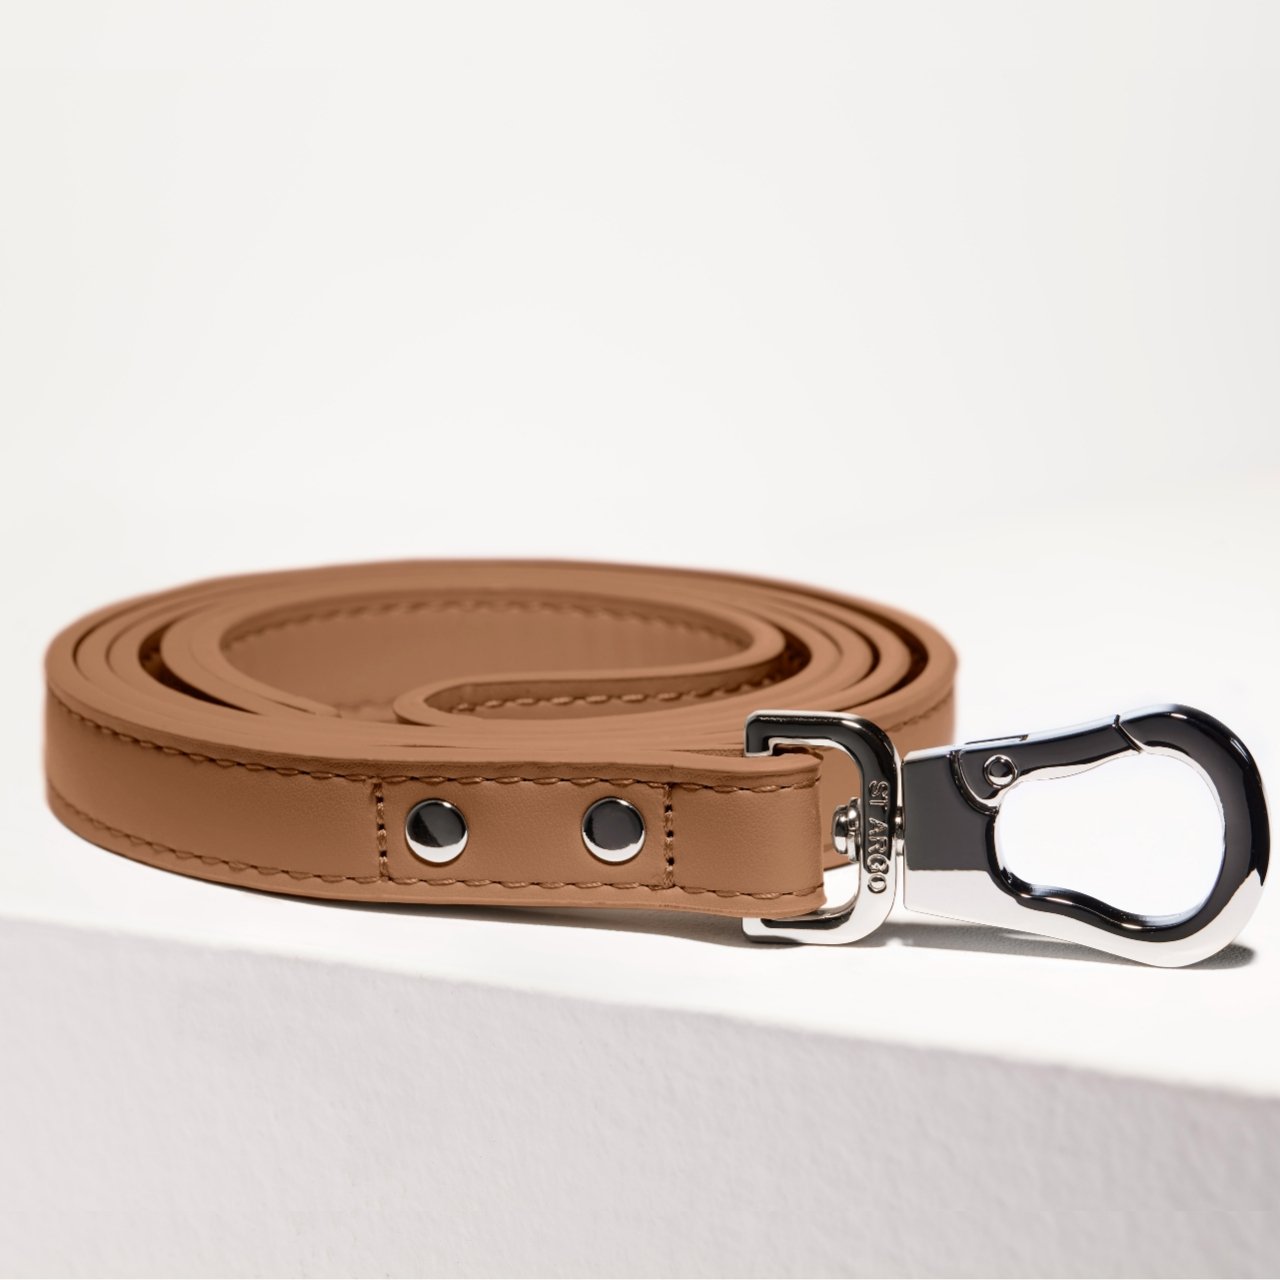 ST ARGO brown vegan leather dog leash with silver clasp